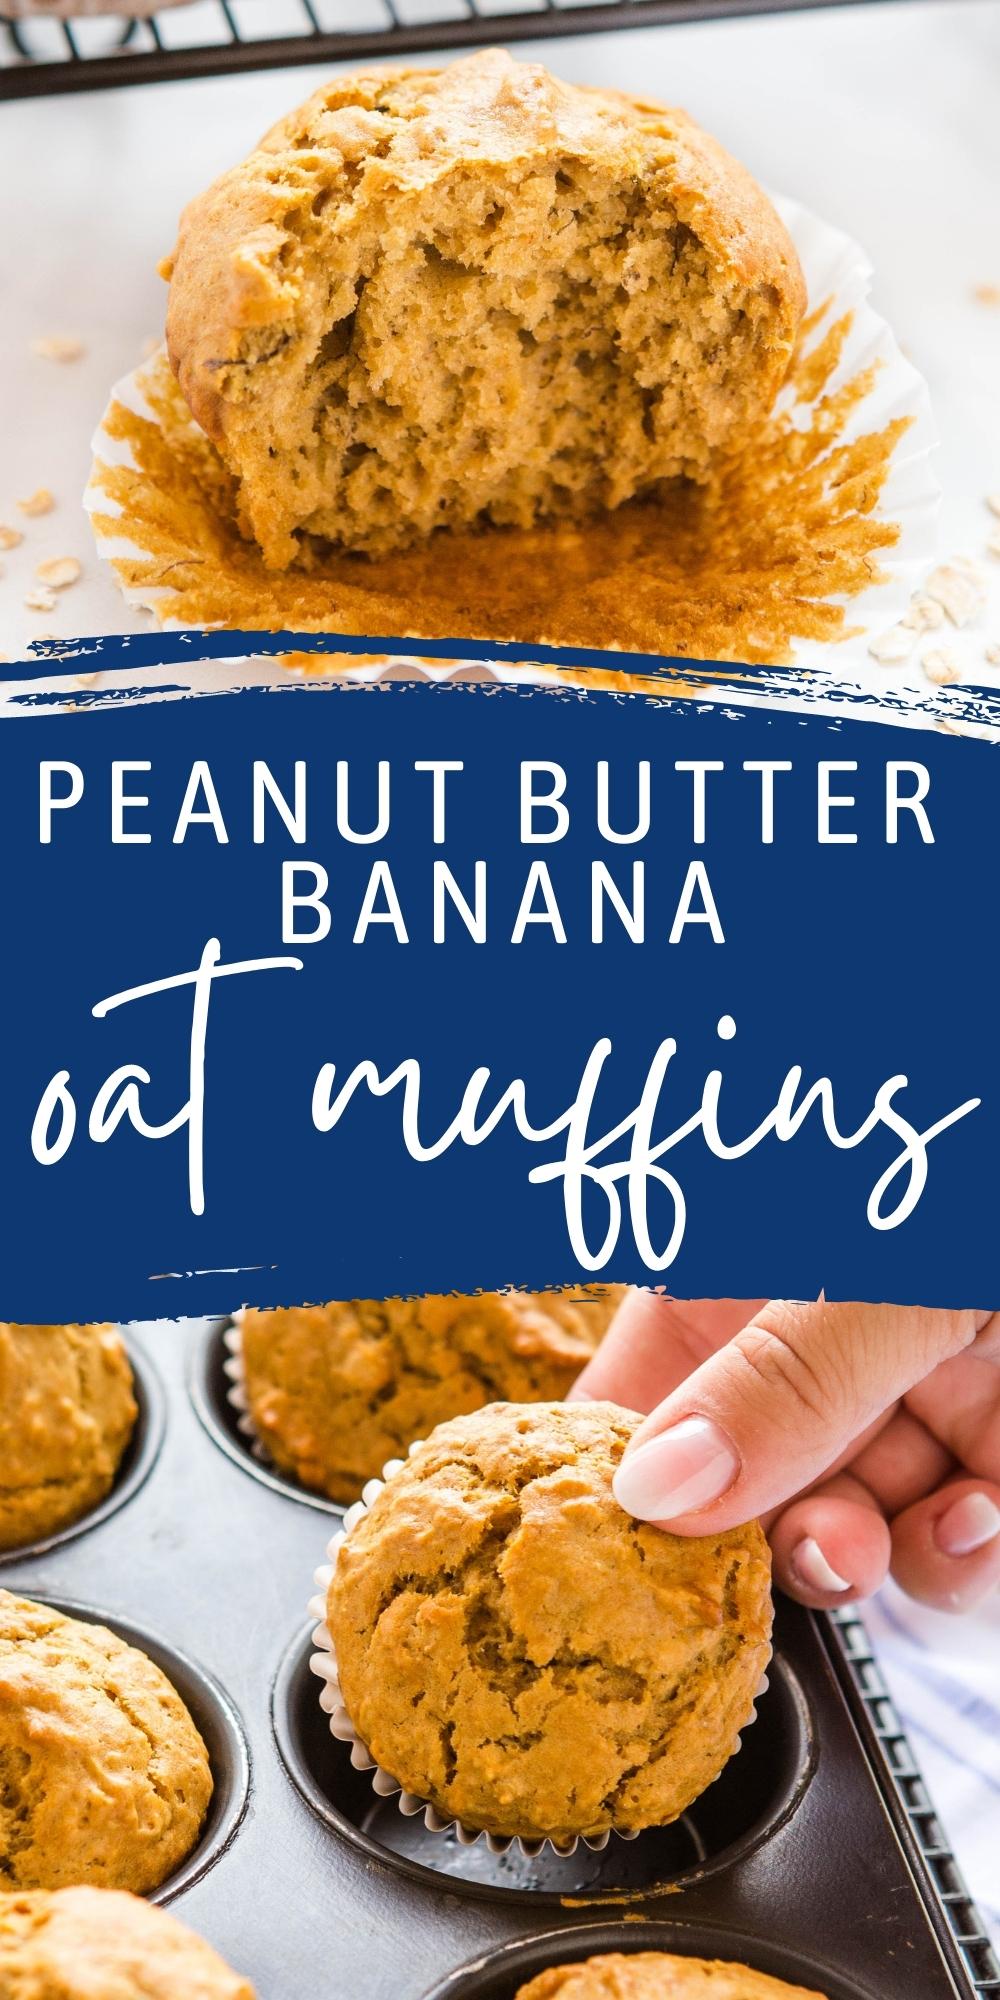 These Peanut Butter Banana Muffins are packed with whole grain oats, healthy fats and protein, making them a delicious and kid-friendly after-school snack for the whole family! Recipe from thebusybaker.ca! #peanutbutterbanana #oatmuffins #afterschool #picnic #snack #kids #kidfriendly #recipesforkids #lunch #healthy #protein via @busybakerblog